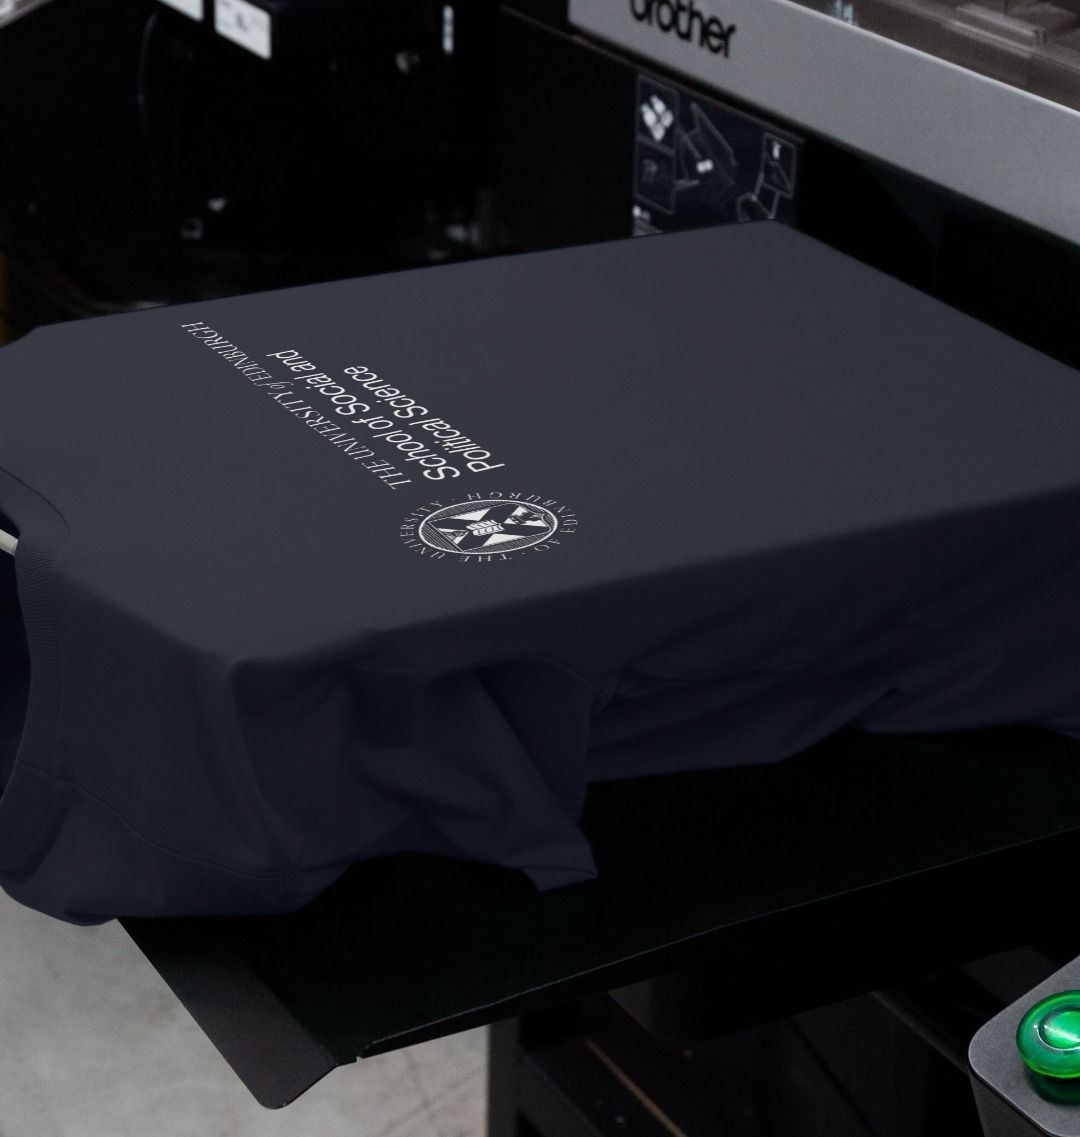 Our School of Social and Political Science T Shirt being printed by our print on demand partner, teemill.